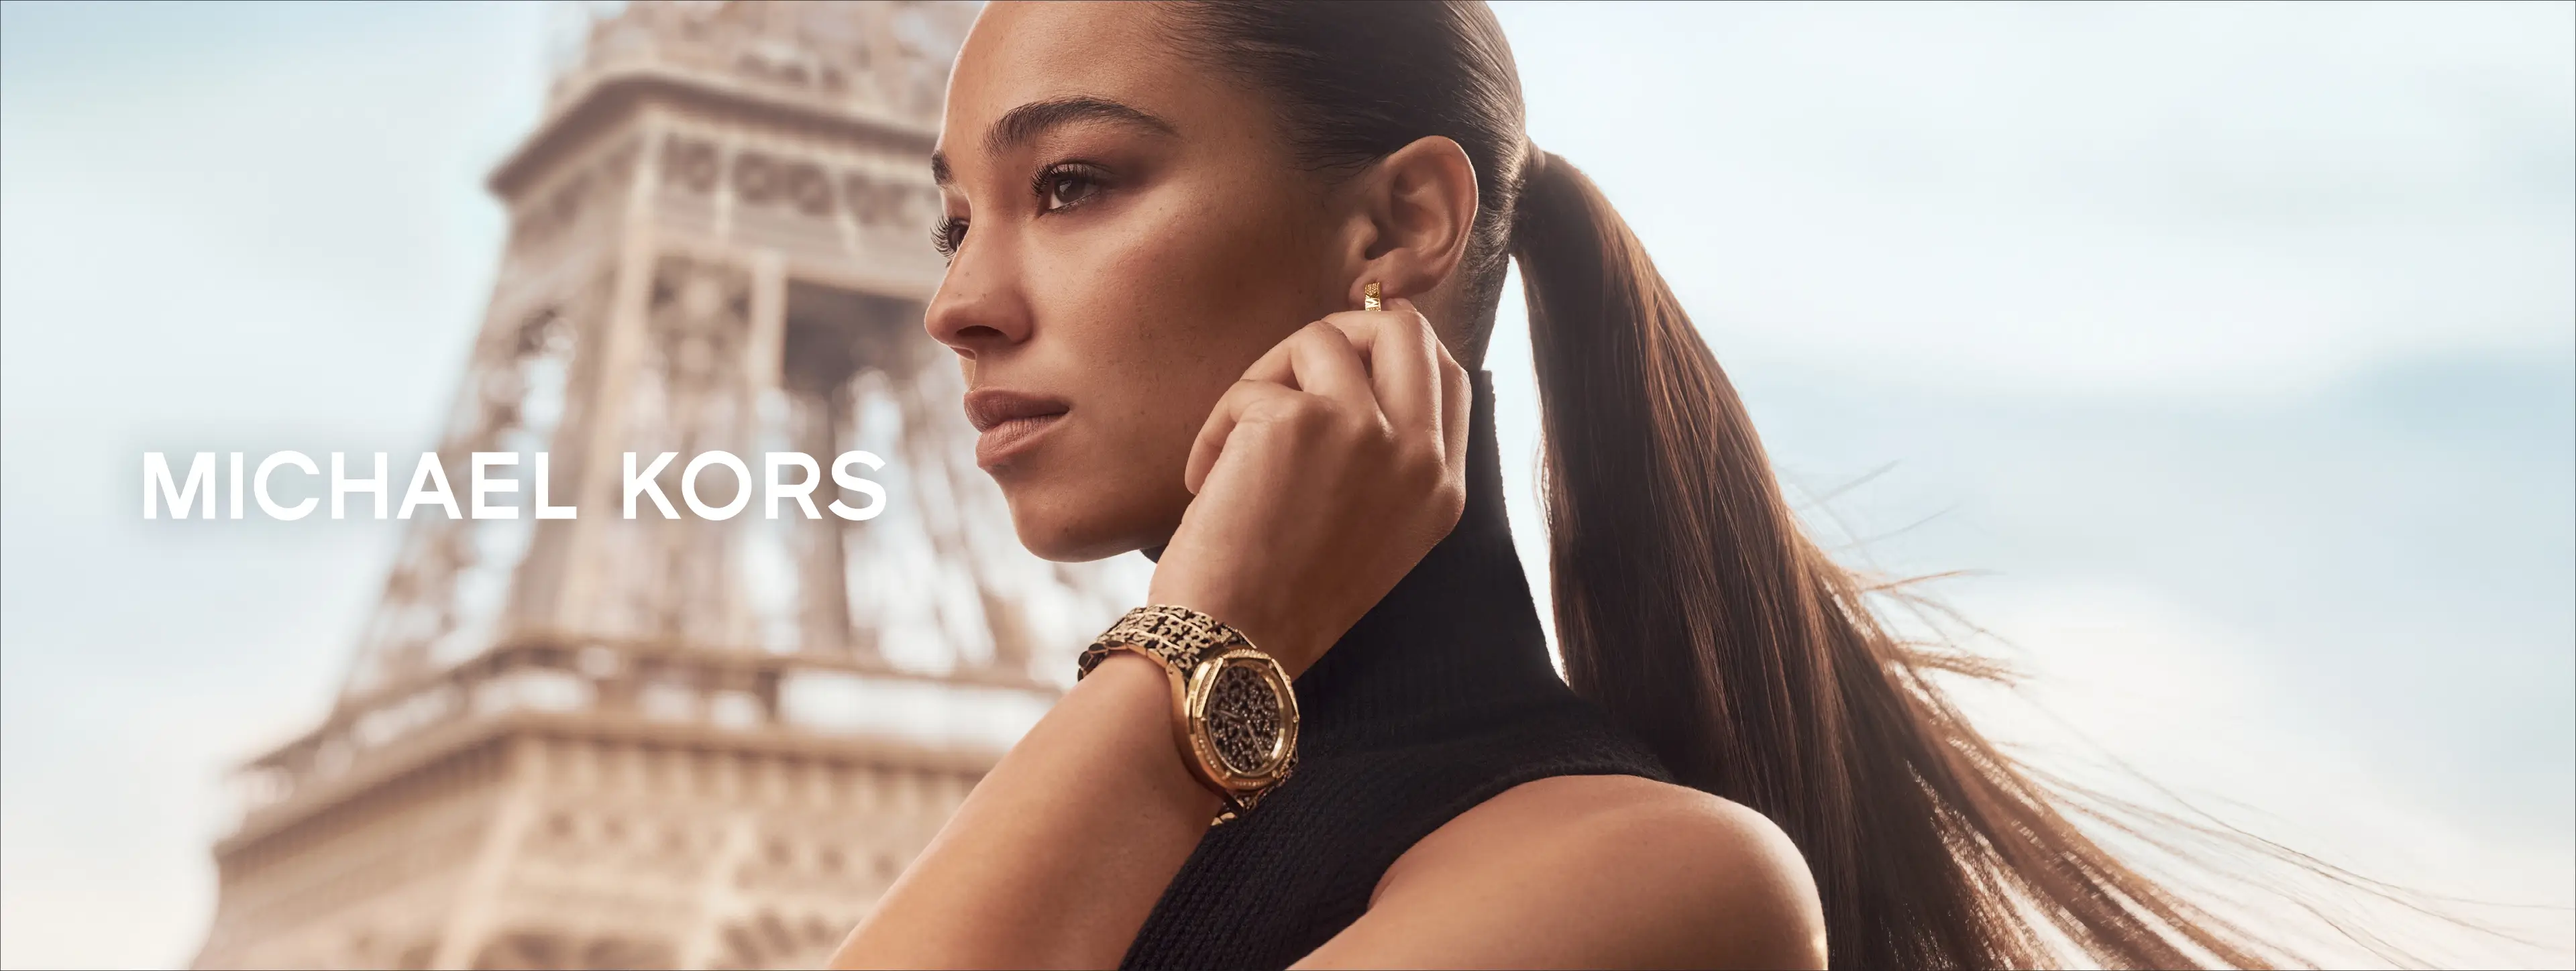 Michael Kors The Fall Fashion Event Sale 25% Off Full Price + Free shipping